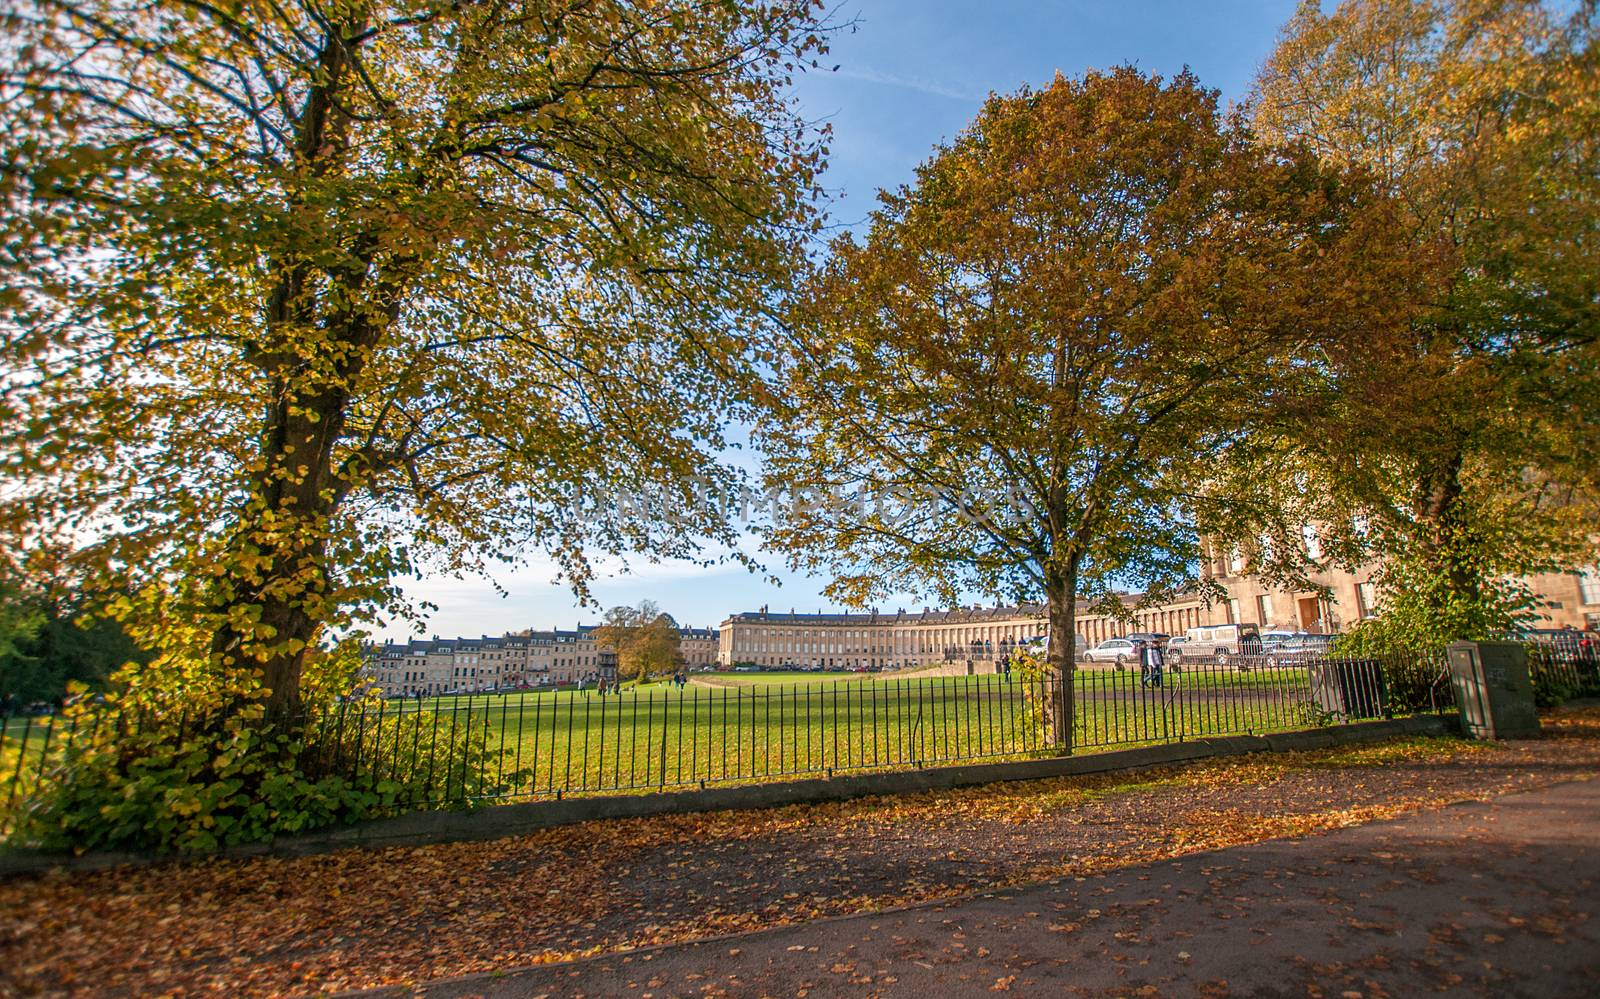 looking through trees at the royal crescent in bath by sirspread